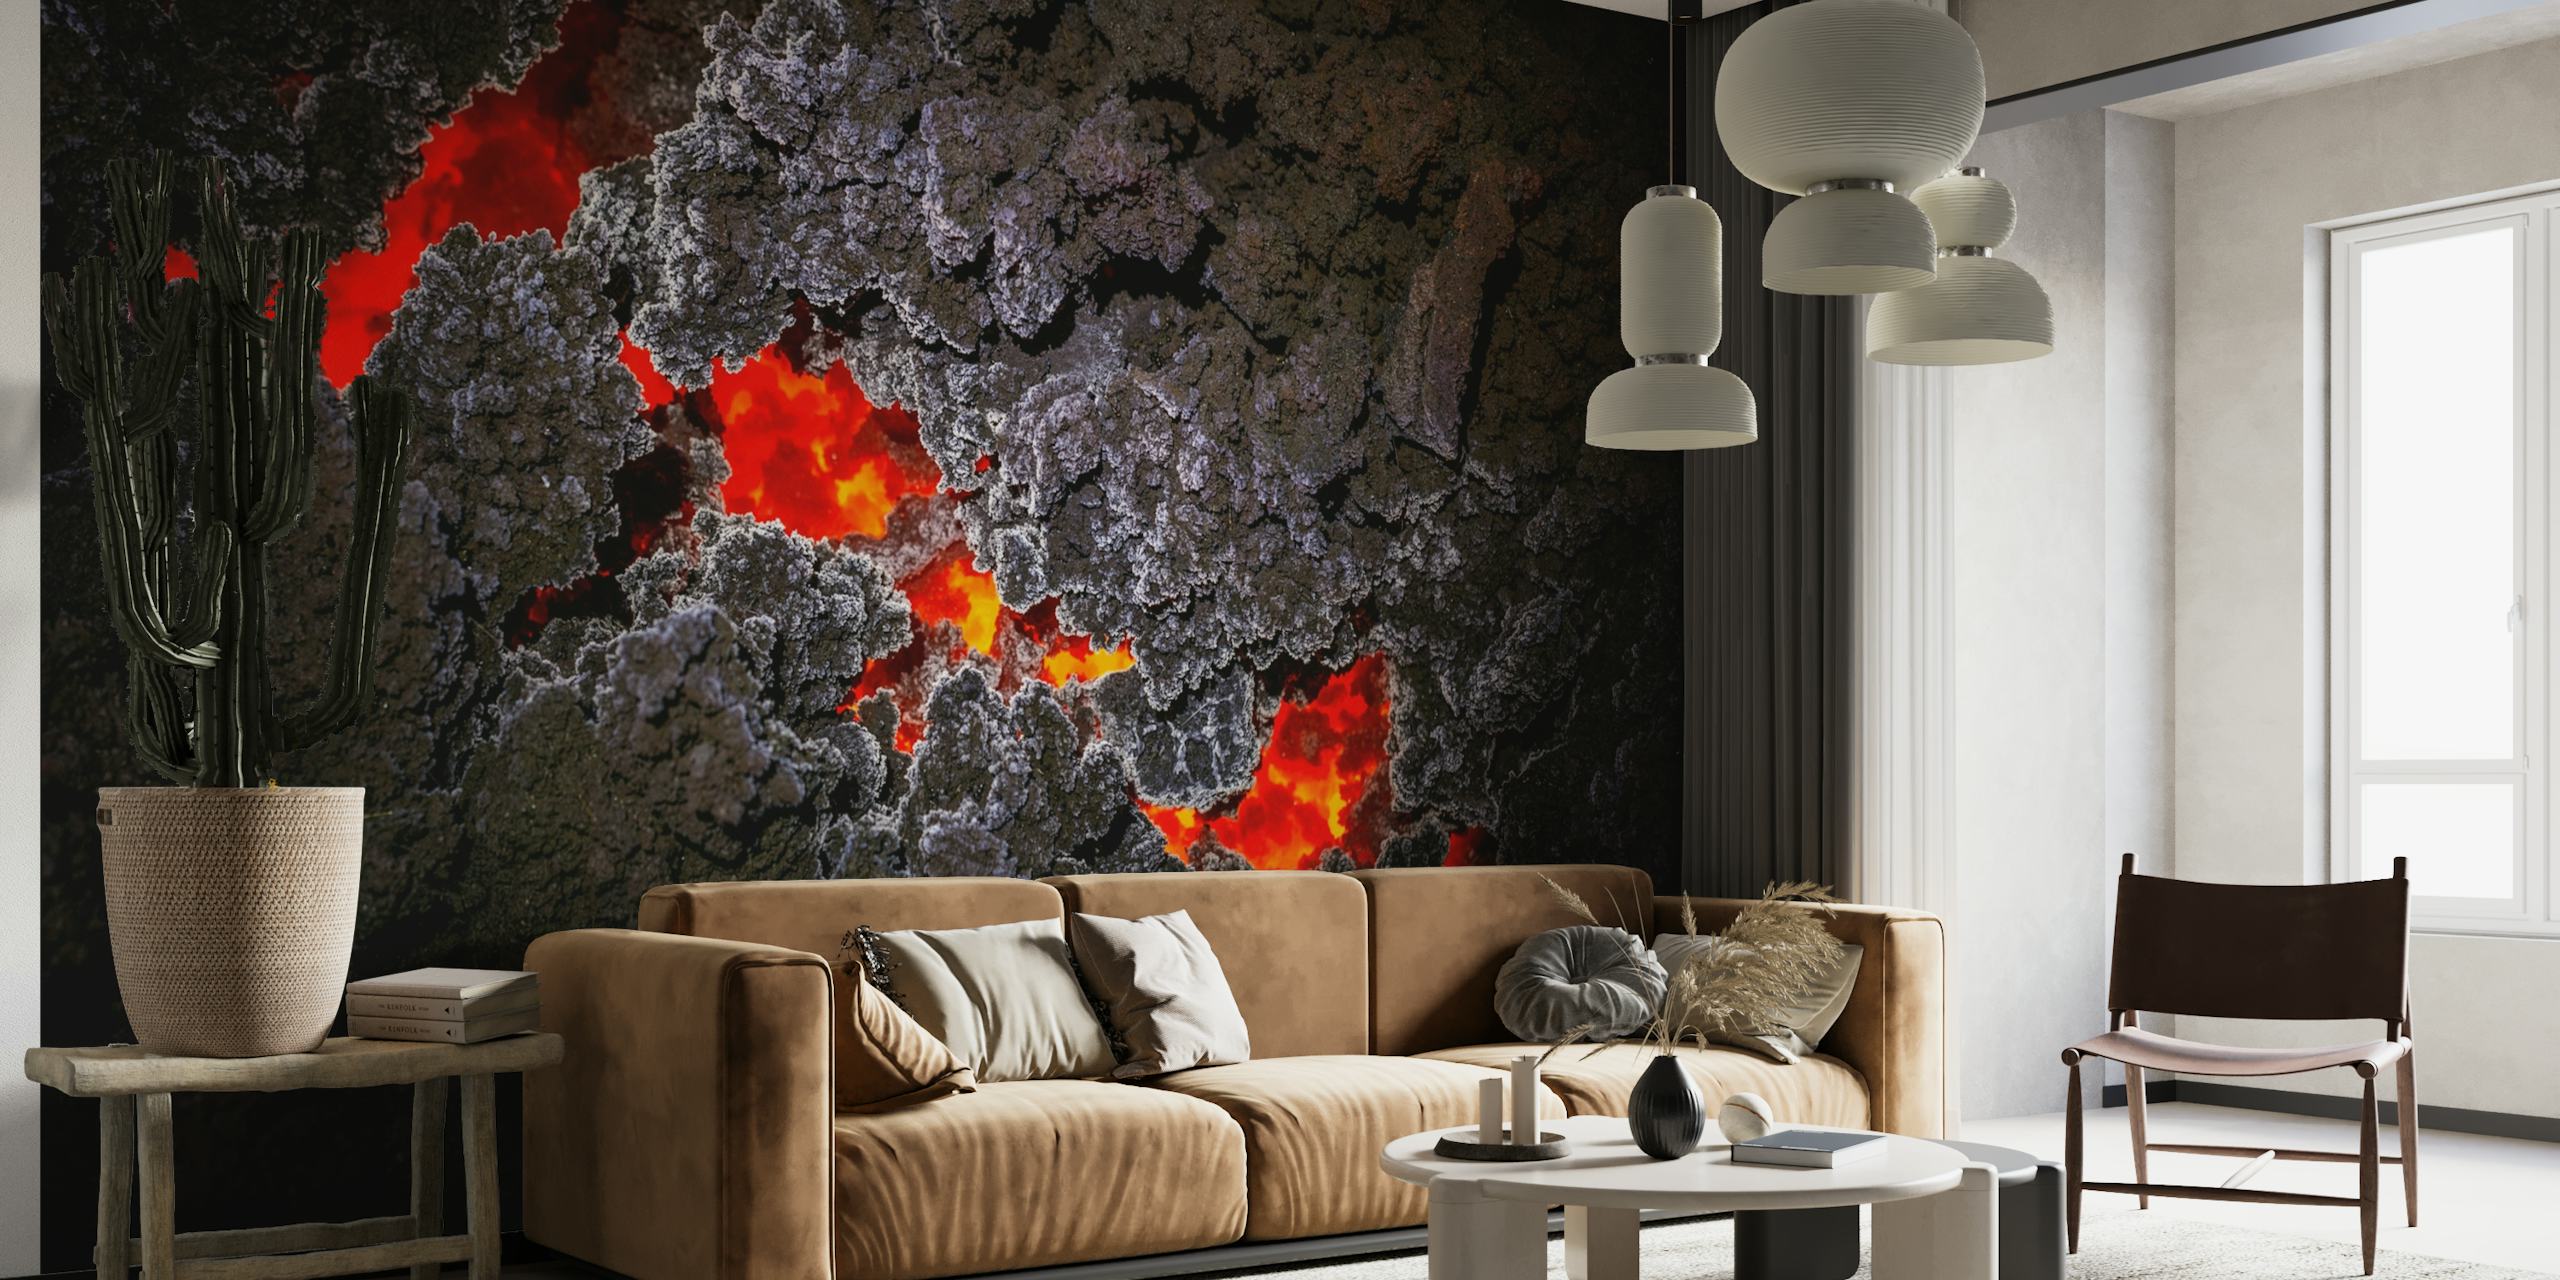 Abstract wall mural with red crystalline patterns on a dark background simulating a geode